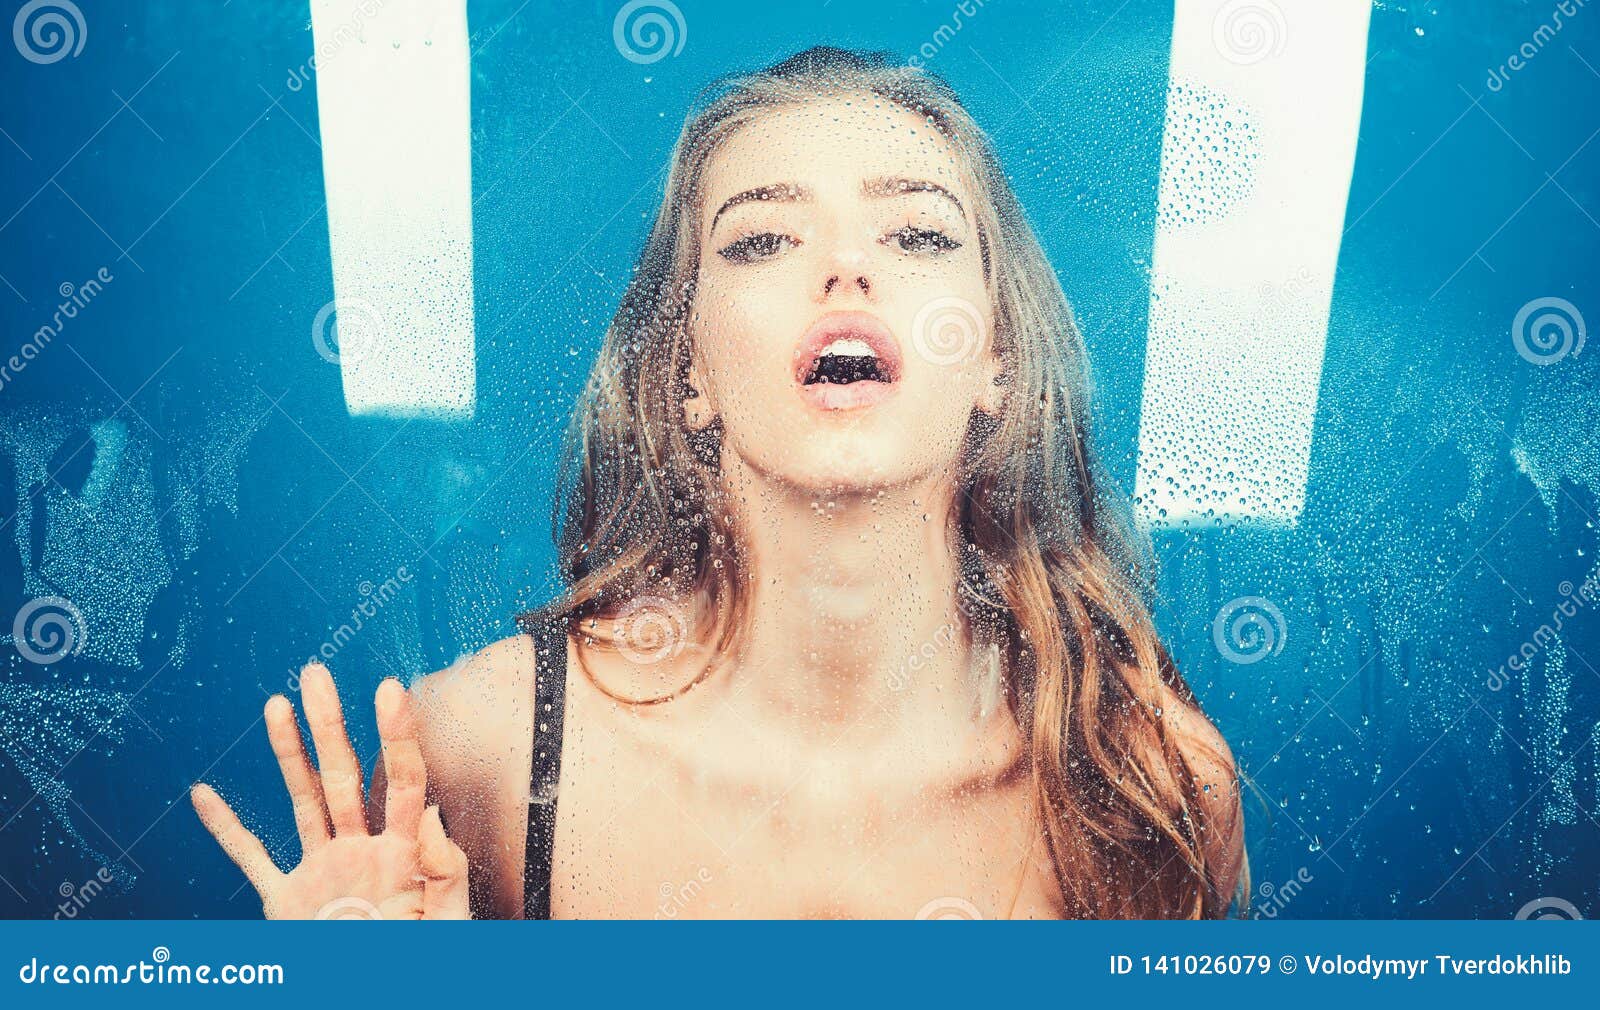 Woman Behind Plastic Sheet With Water Drops Shower And Hygiene Spa Treatment Window With Water